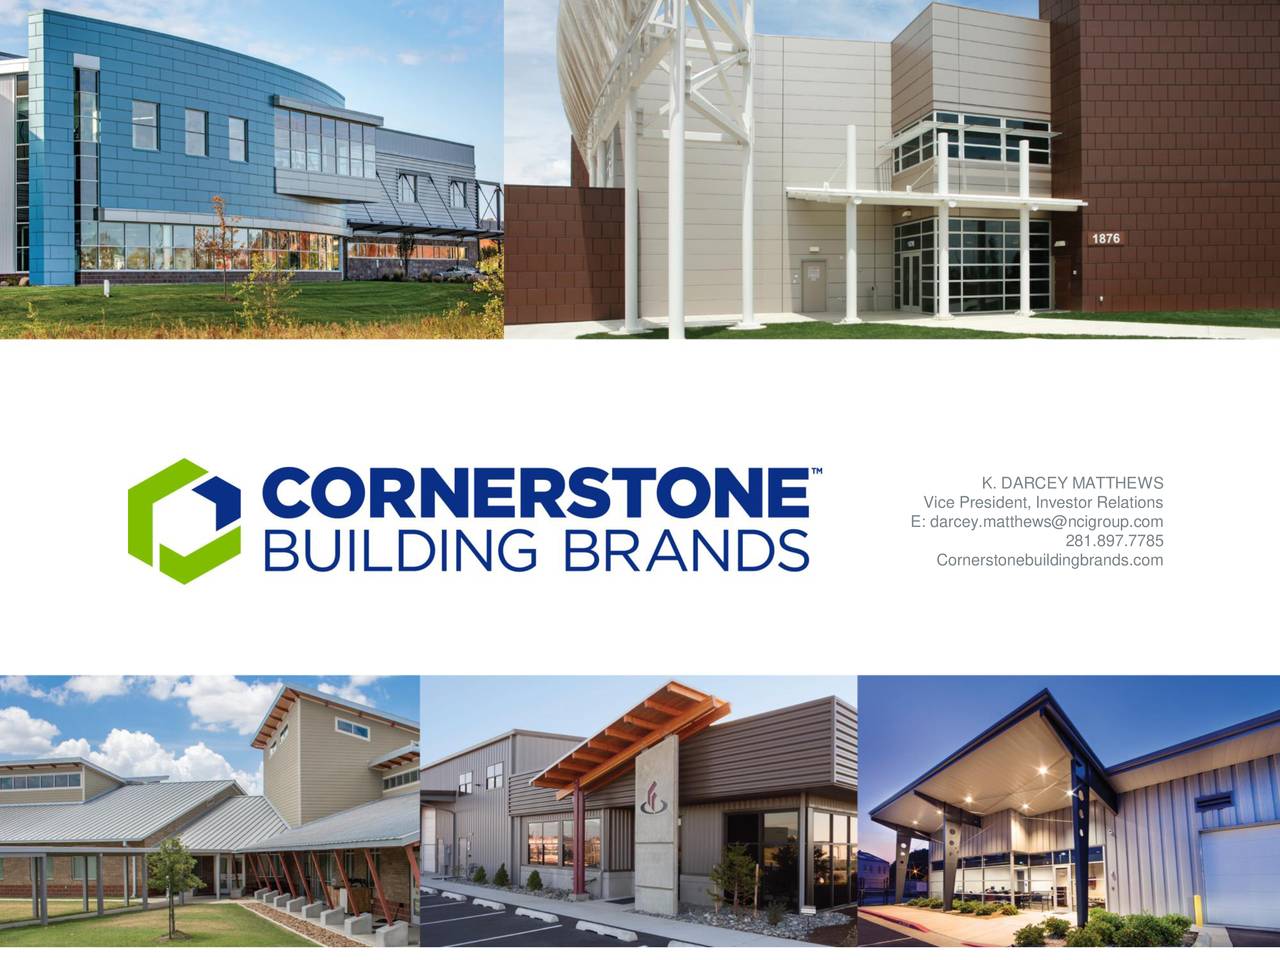 Cornerstone Building Brands Inc 2019 Q2 Results Earnings Call Slides Nyse Cnr Seeking Alpha